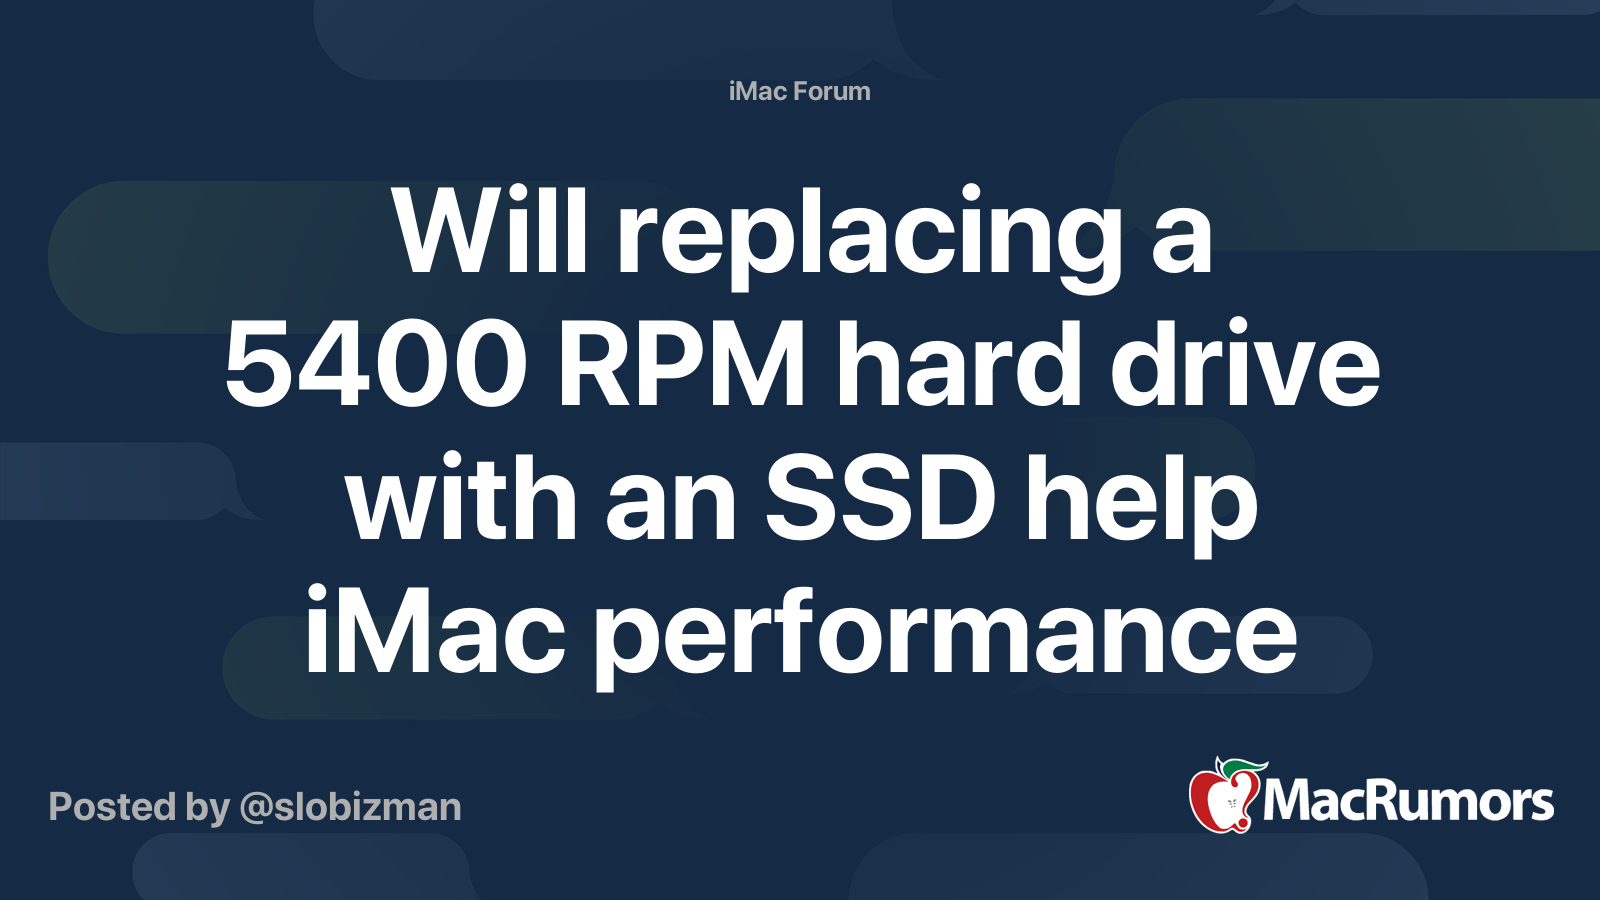 Indirekte Henfald Rejse Will replacing a 5400 RPM hard drive with an SSD help iMac performance  substantially? | MacRumors Forums